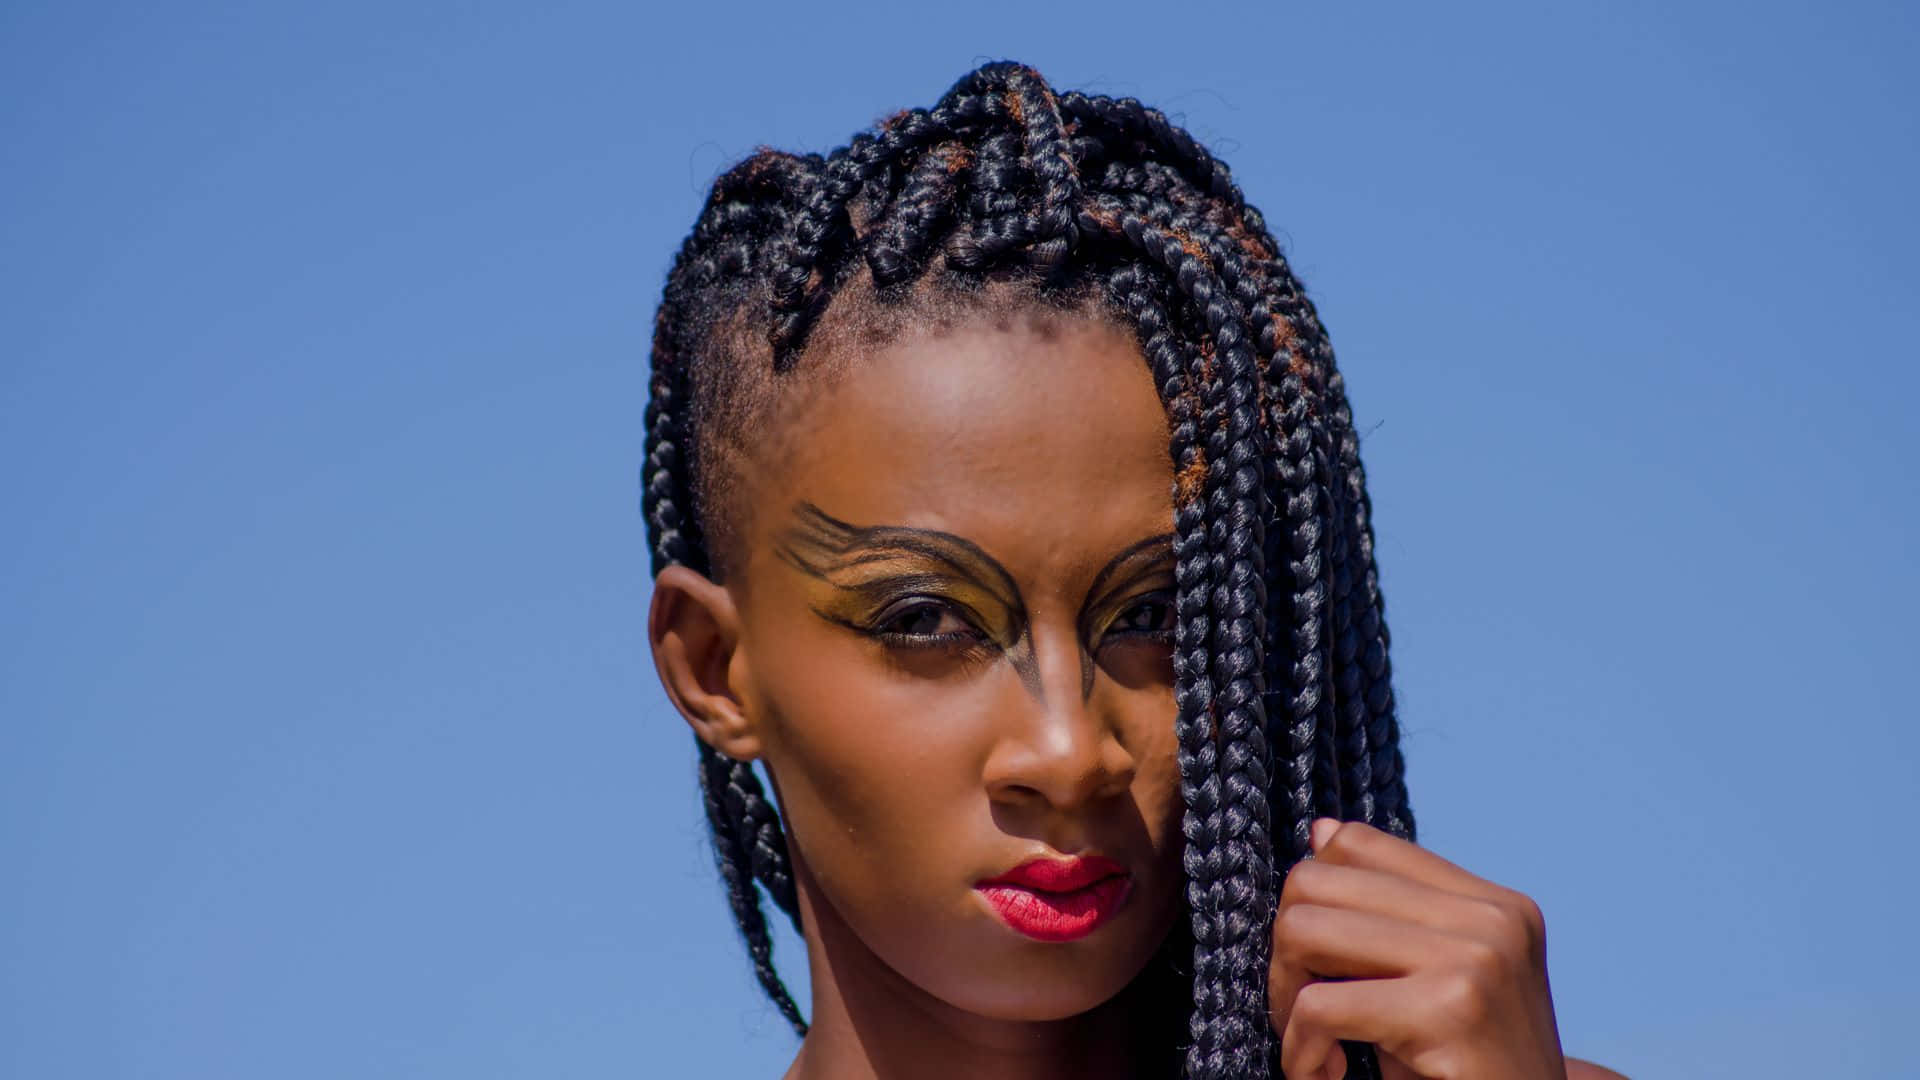 A Young Woman With Braids And Makeup